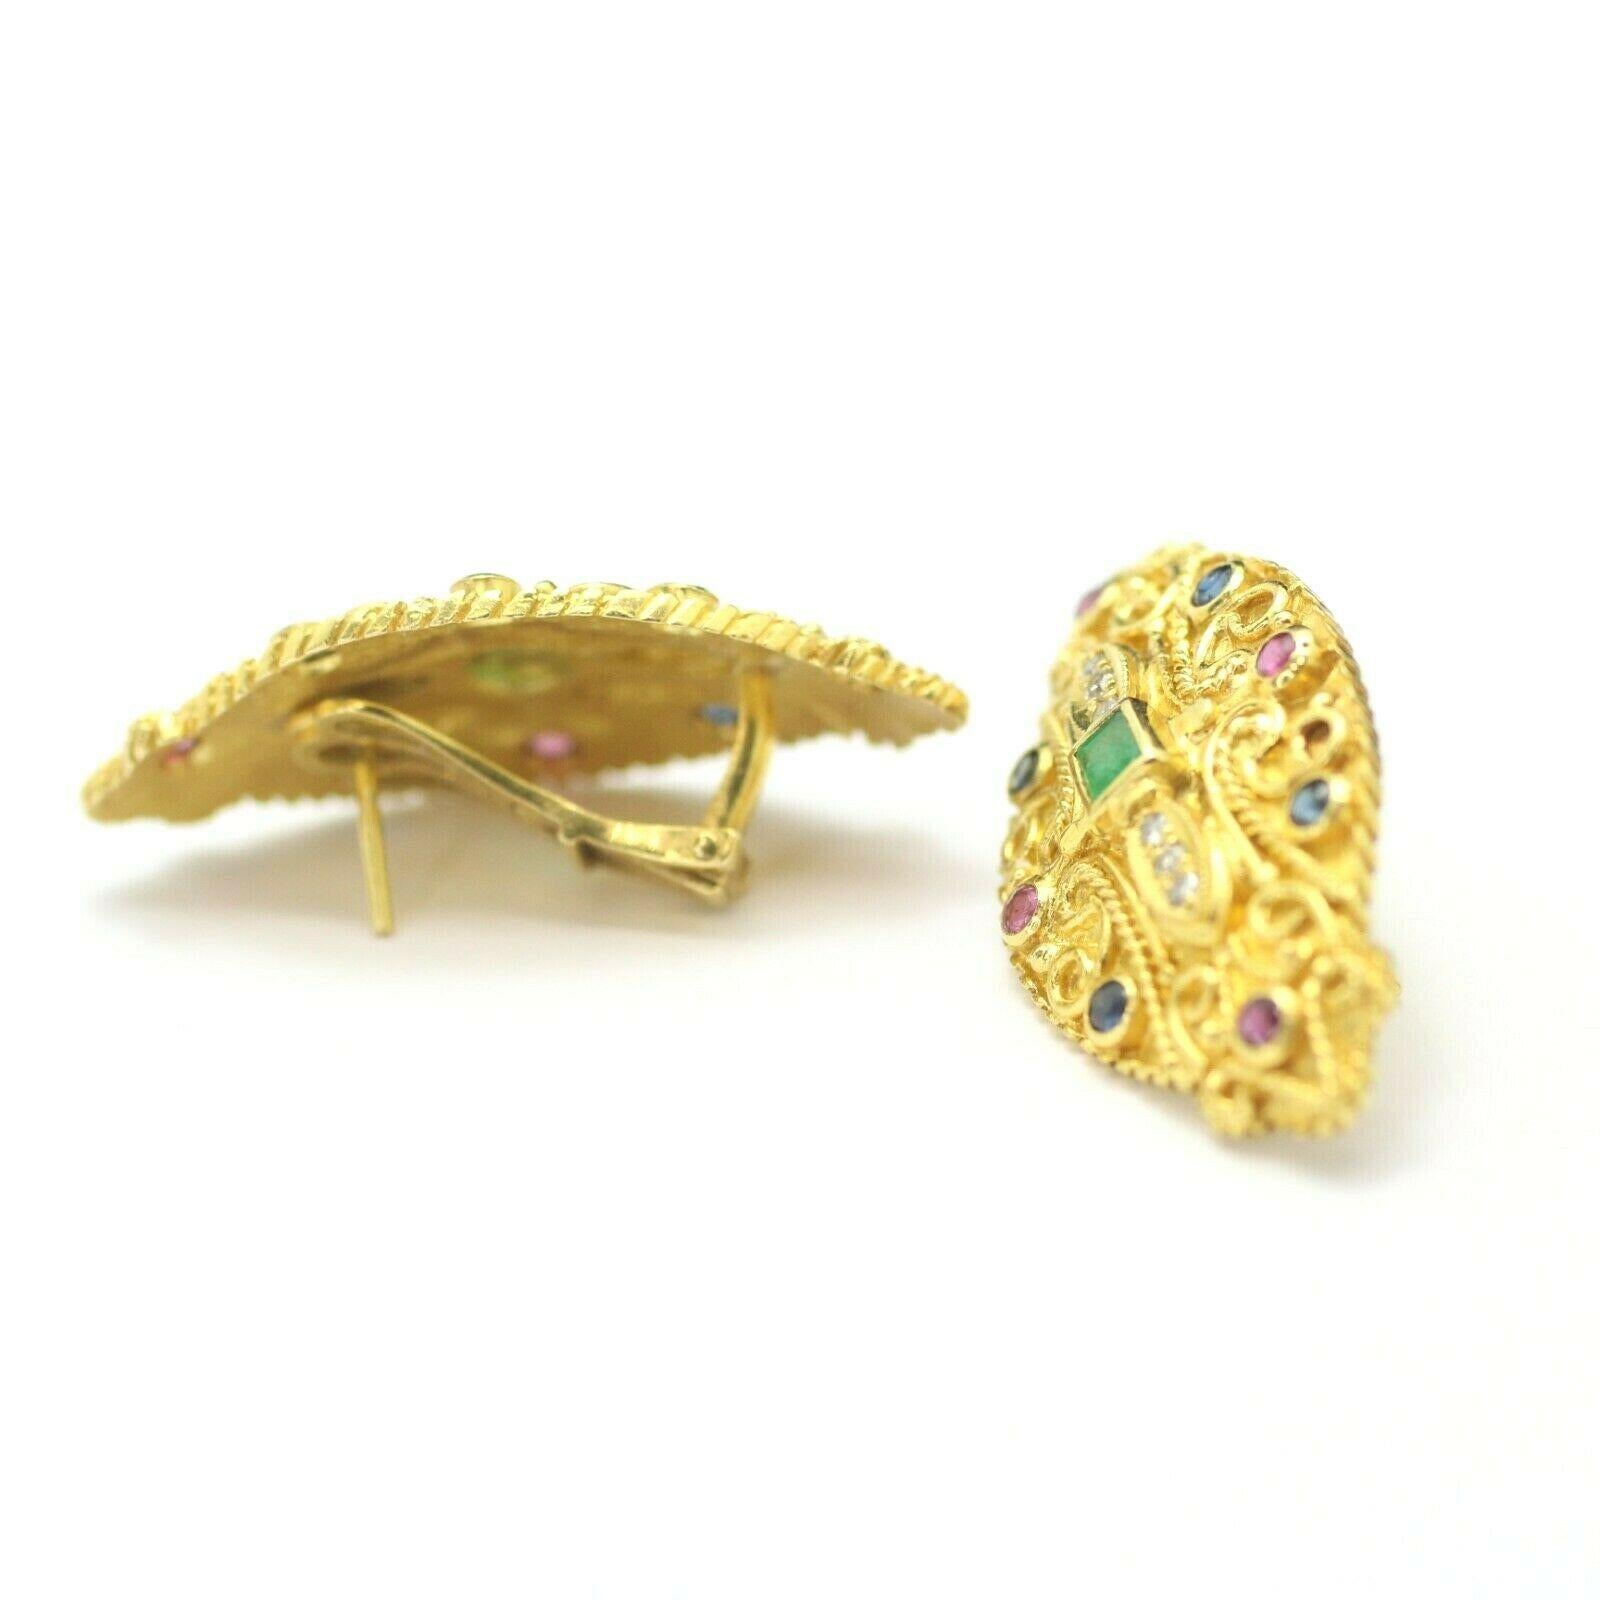 Round Cut Estate Vintage Gemstones and Diamond Clip on Earrings in 18k Yellow Gold